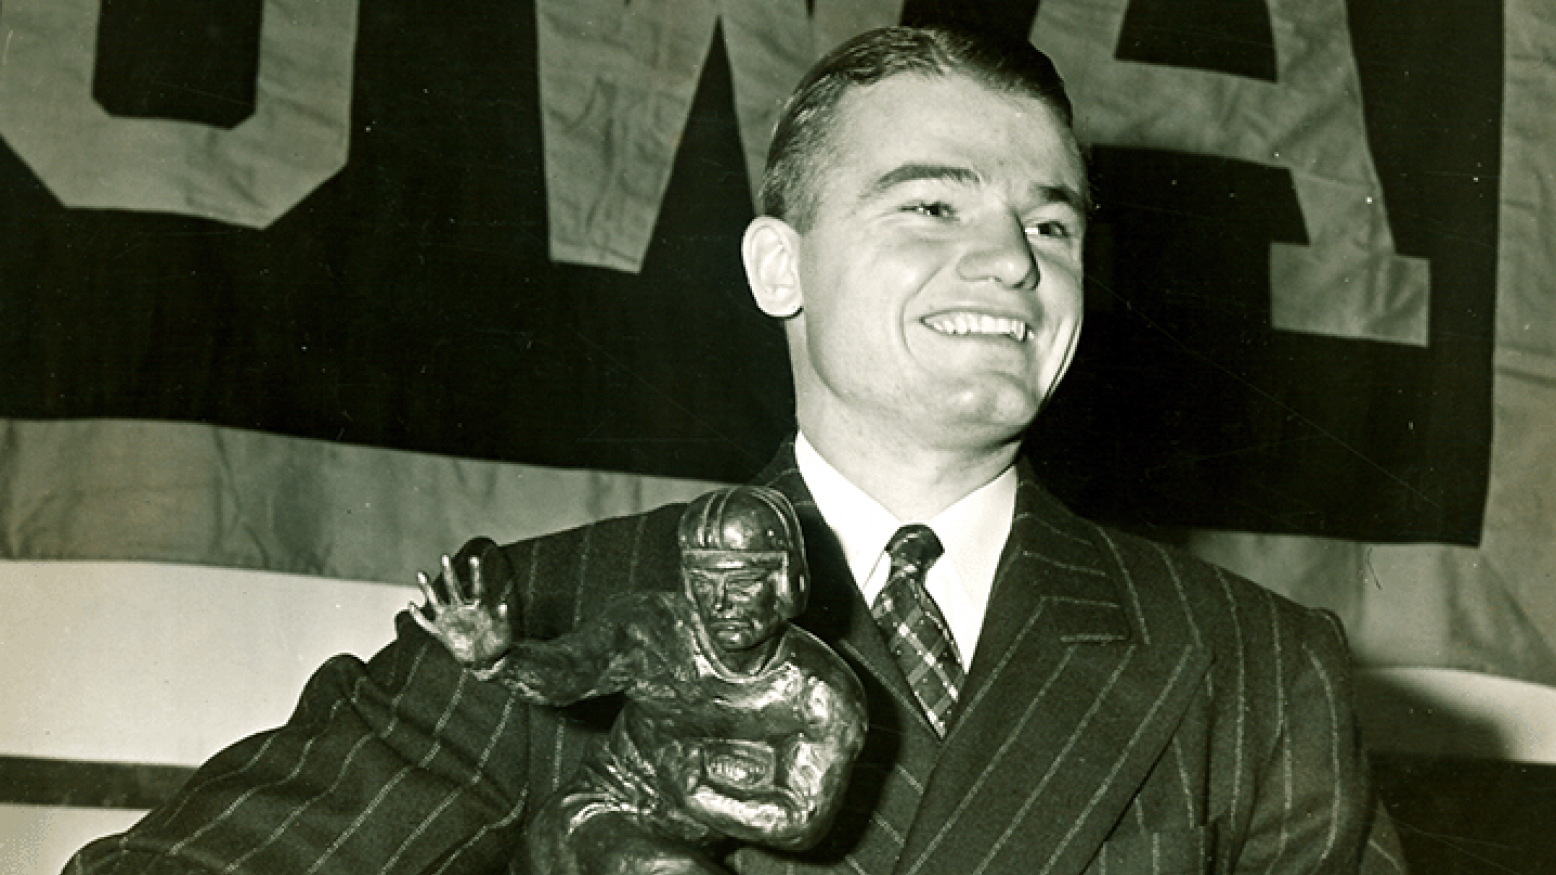 A black and white image of a young, smiling Nile Kinnick holding the Heisman Trophy. In the background, part of a flag that reads "IOWA" is visible. 